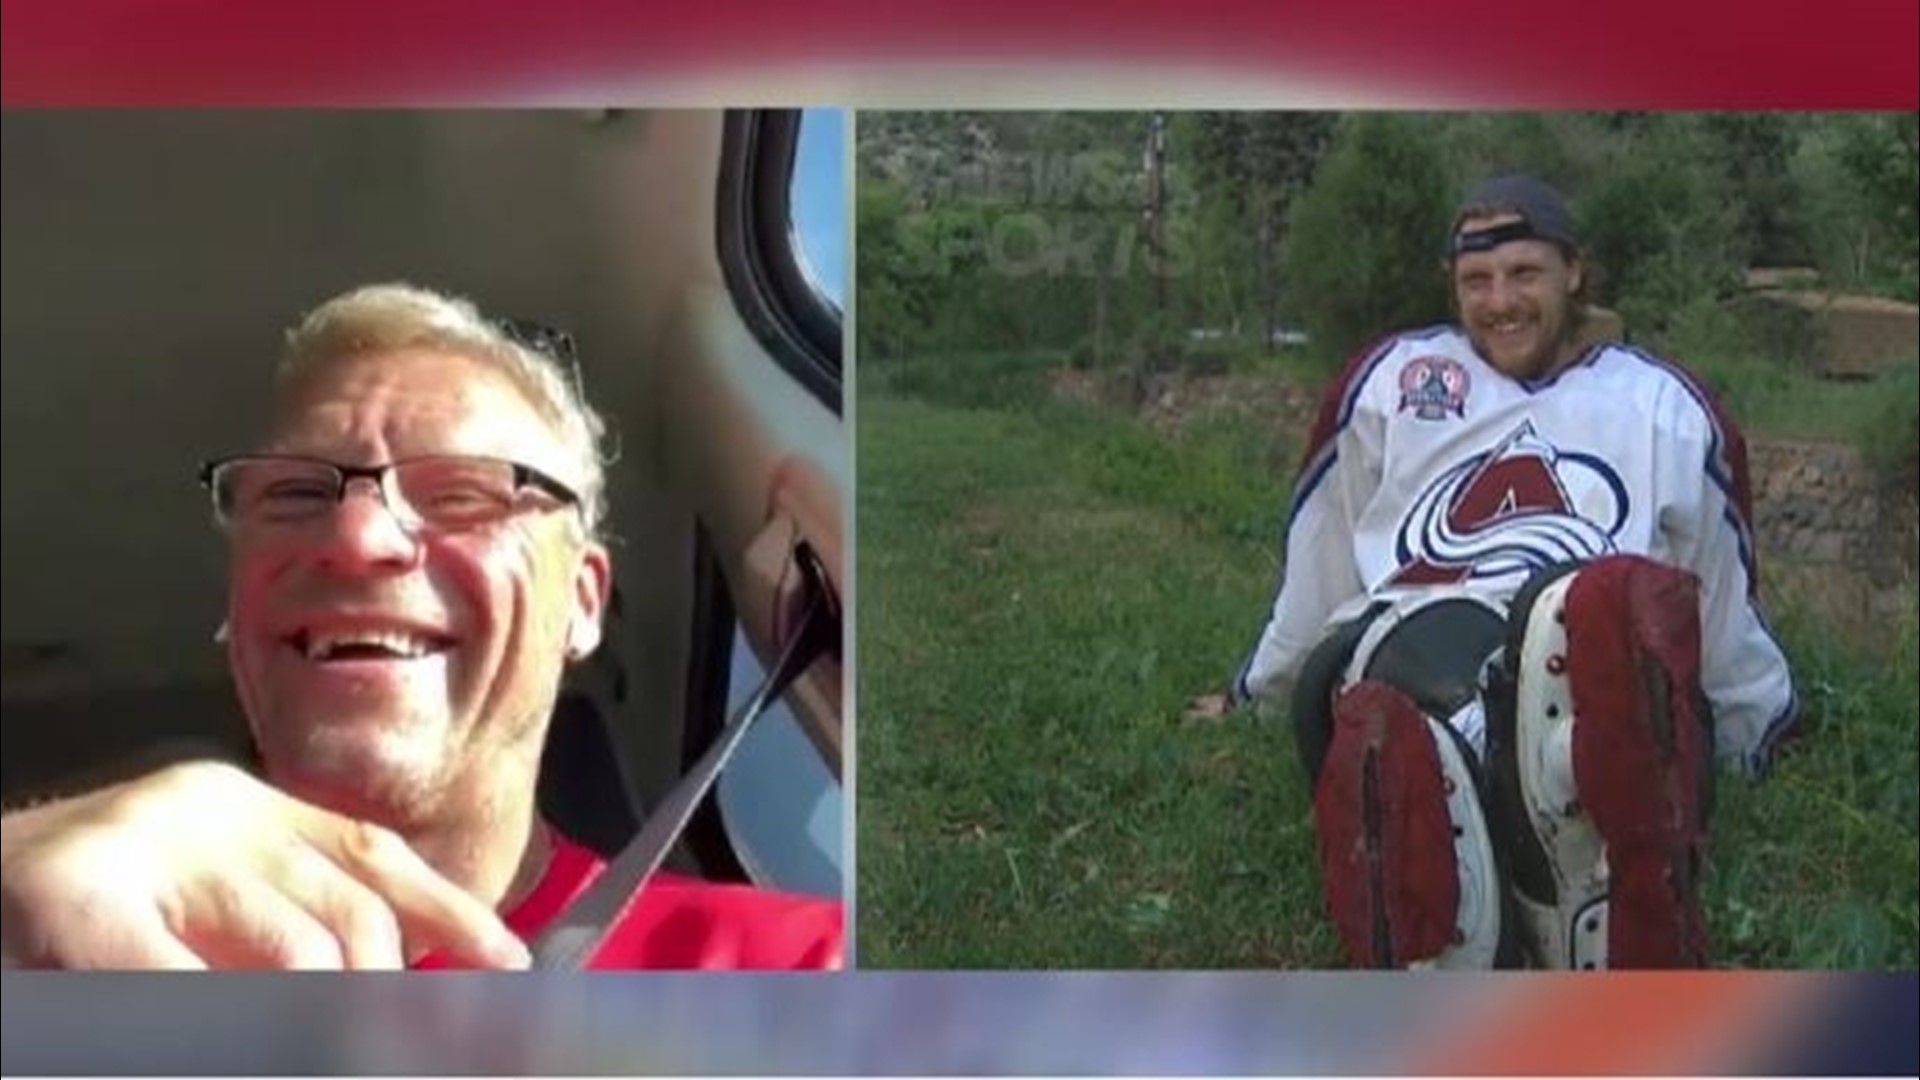 A double-dare turned into a hilarious day in Morrison for the Avalanche's Stanley Cup Champion